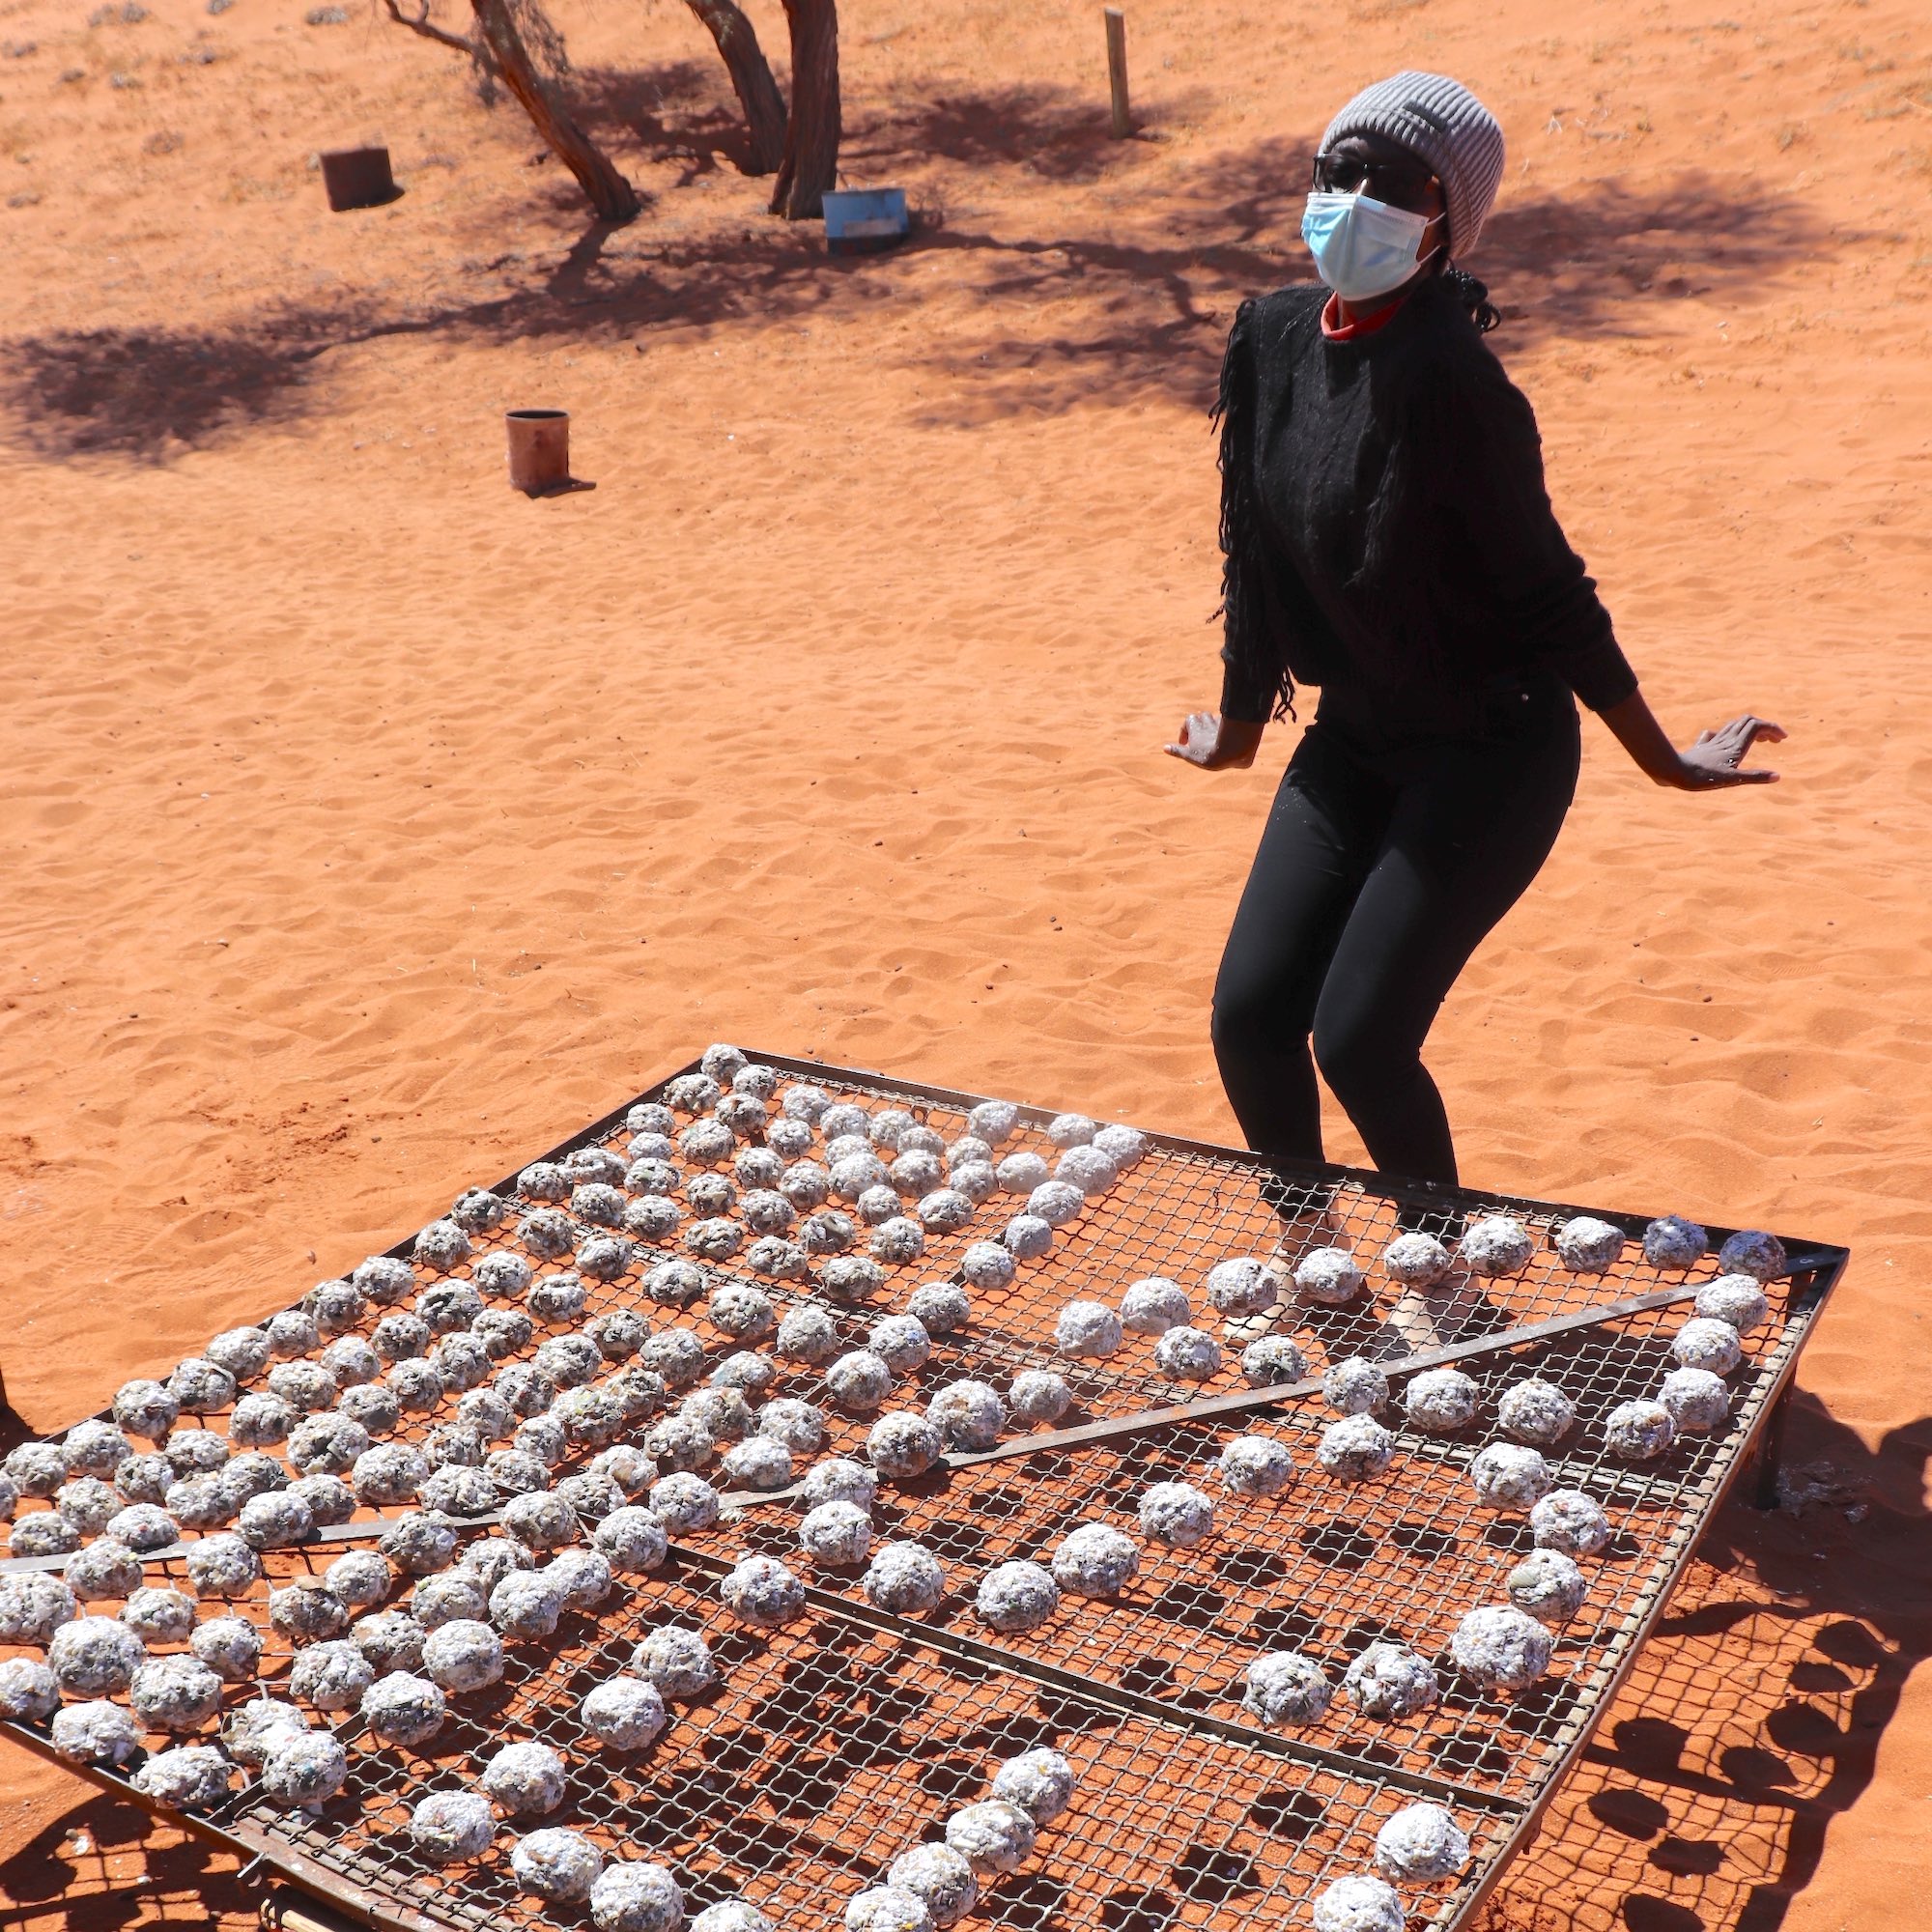 A woman poses next to a mesh grid with fireballs drying on it.